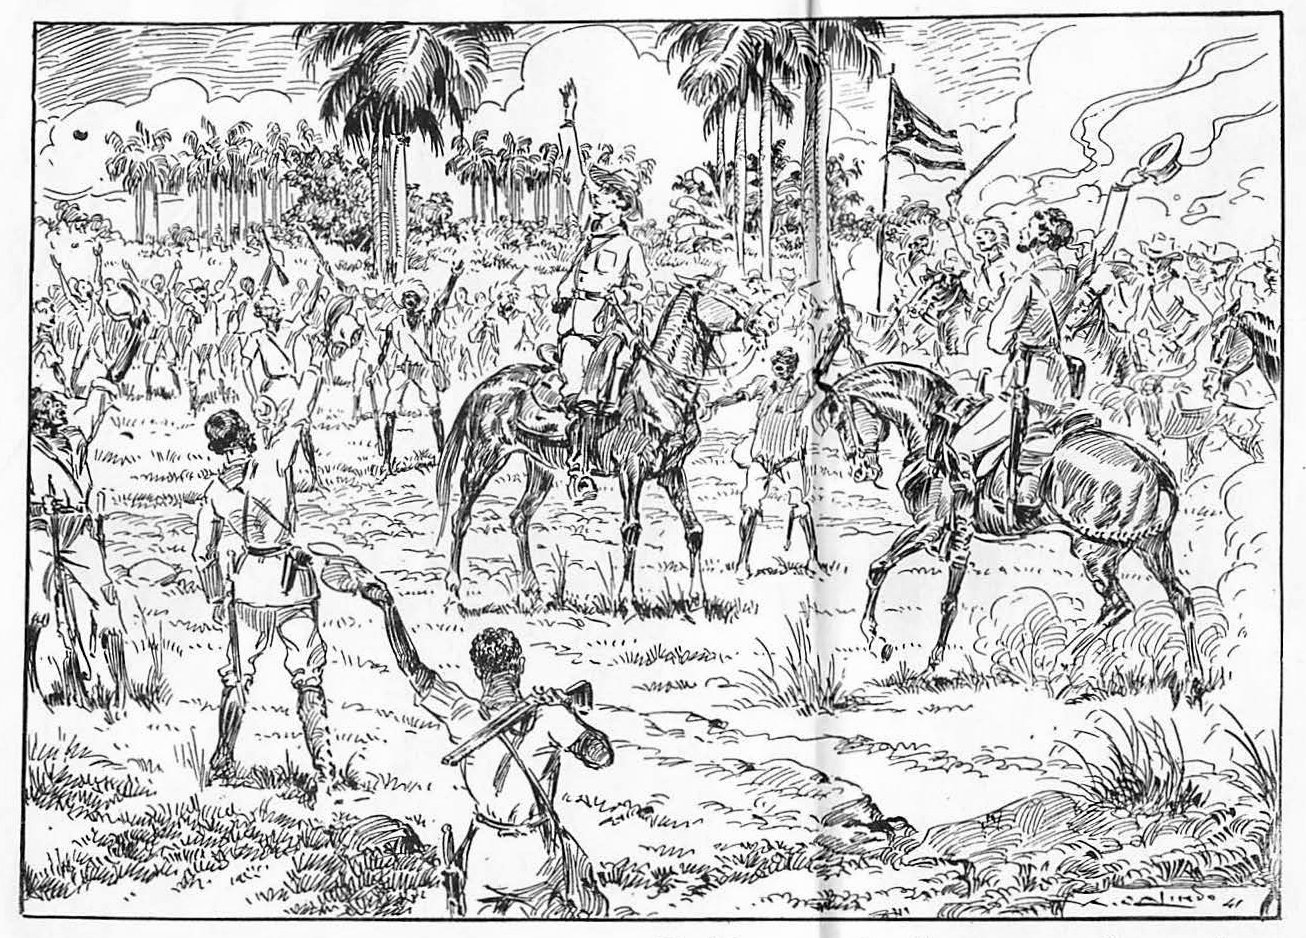 Camagüey’s palm groves are the site fierce battles against the Spanish and Ignacio Agramonte is in the middle of it, an idol to the Cuban troops.